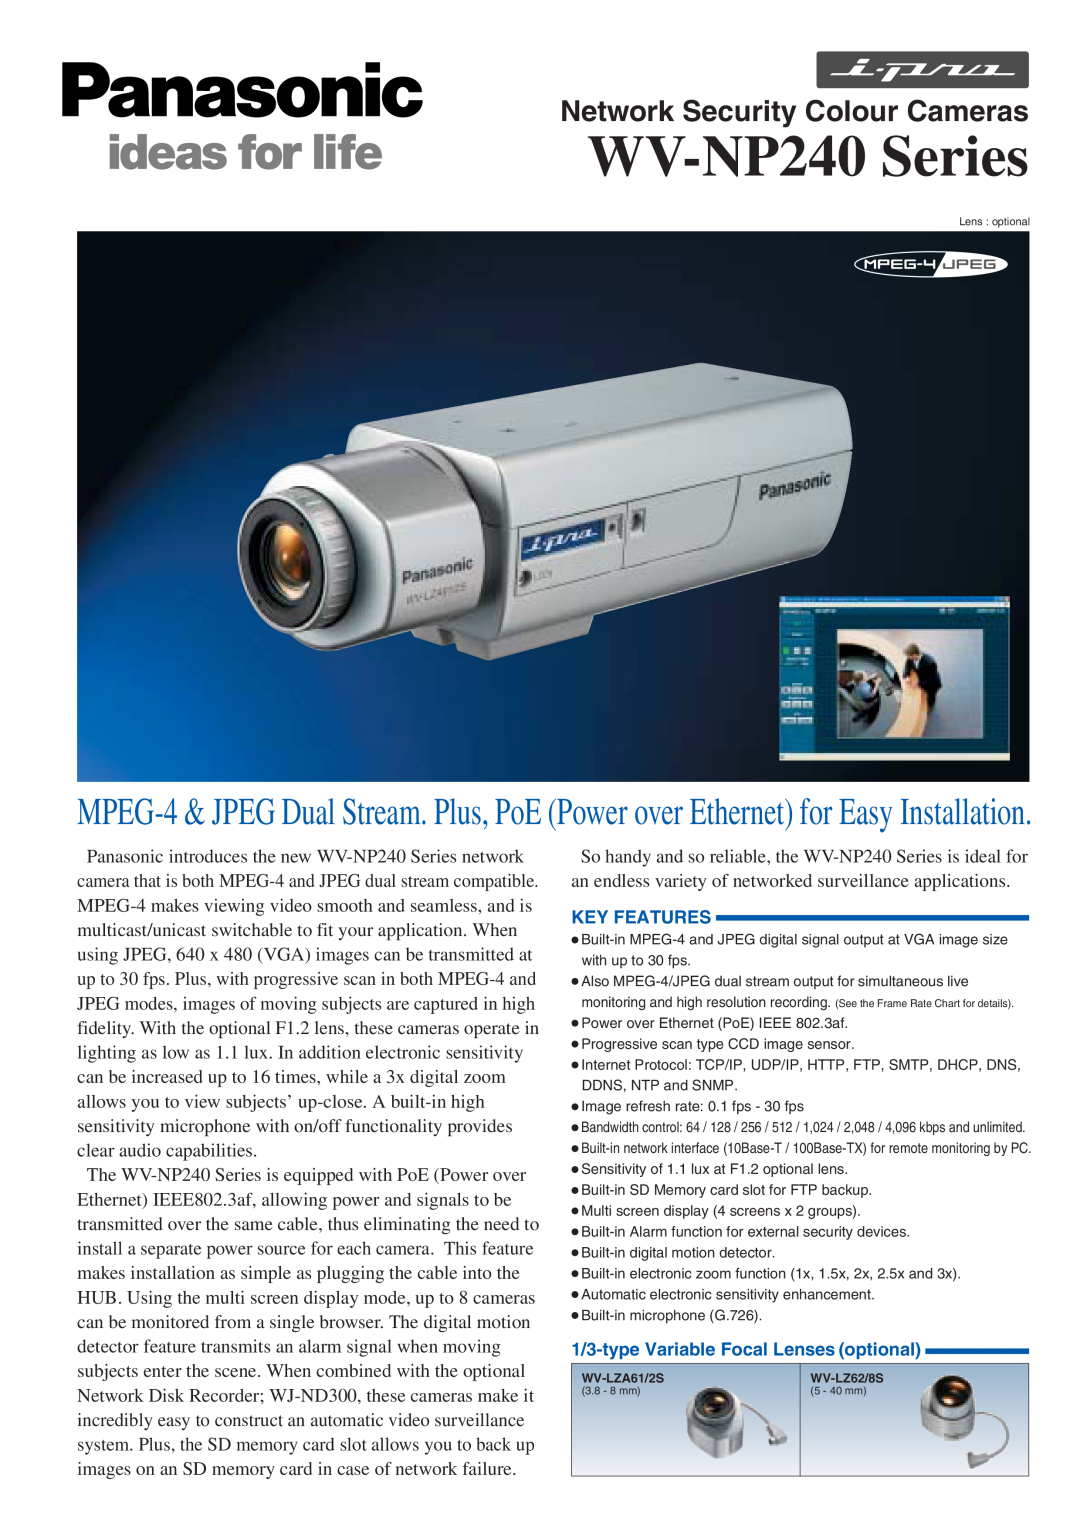 Panasonic manual WV-NP240Series, Network Security Colour Cameras, Key Features, 1/3-typeVariable Focal Lenses optional 